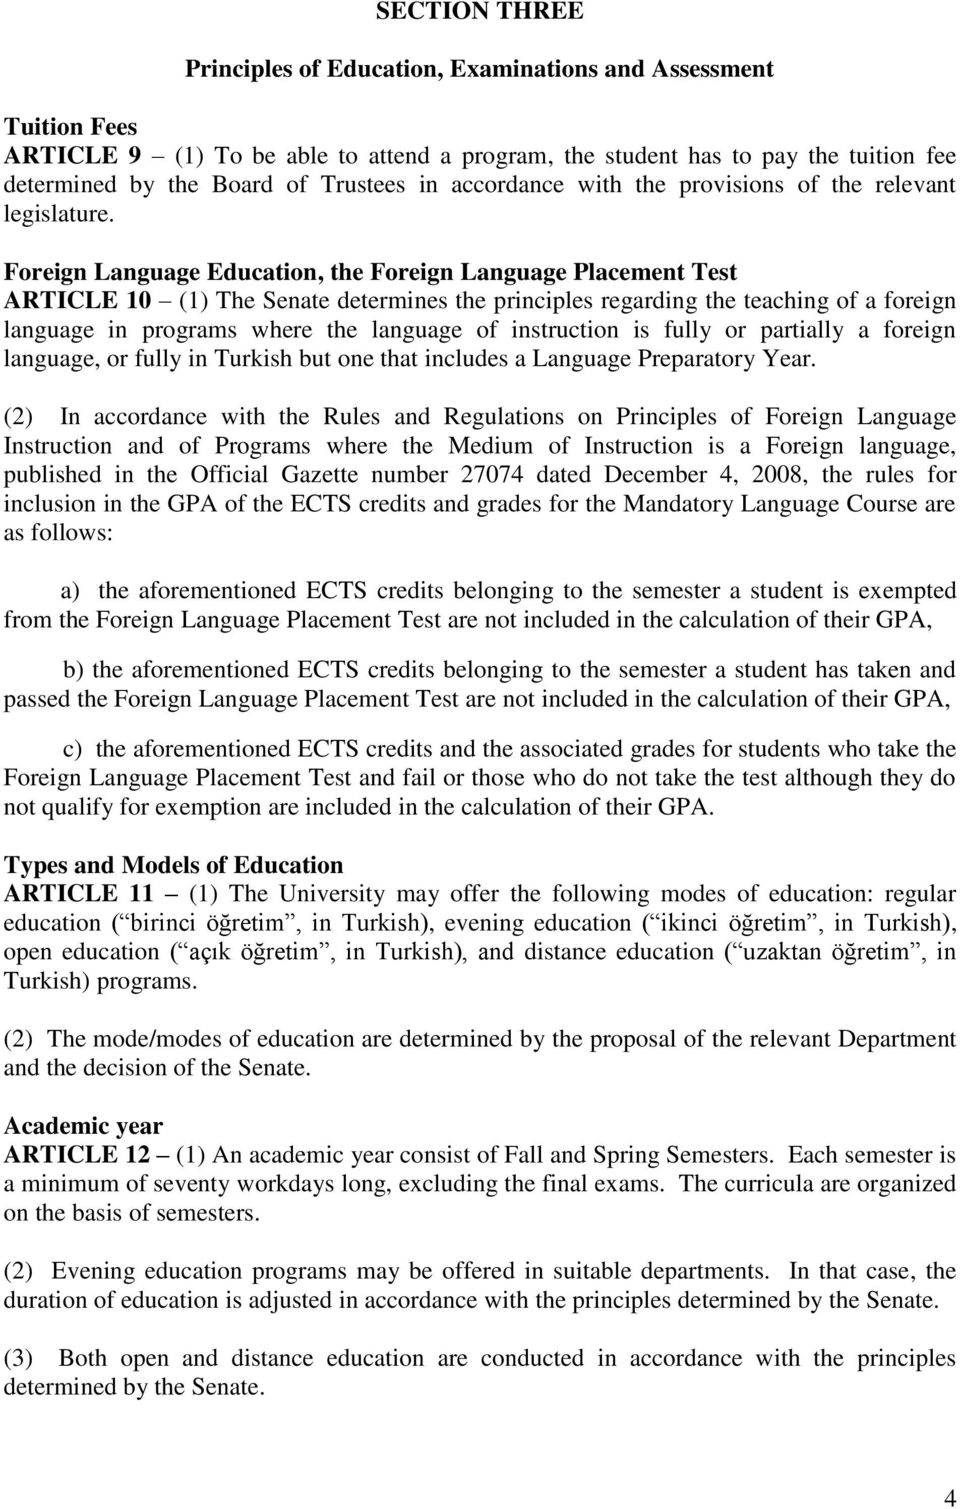 Foreign Language Education, the Foreign Language Placement Test ARTICLE 10 (1) The Senate determines the principles regarding the teaching of a foreign language in programs where the language of